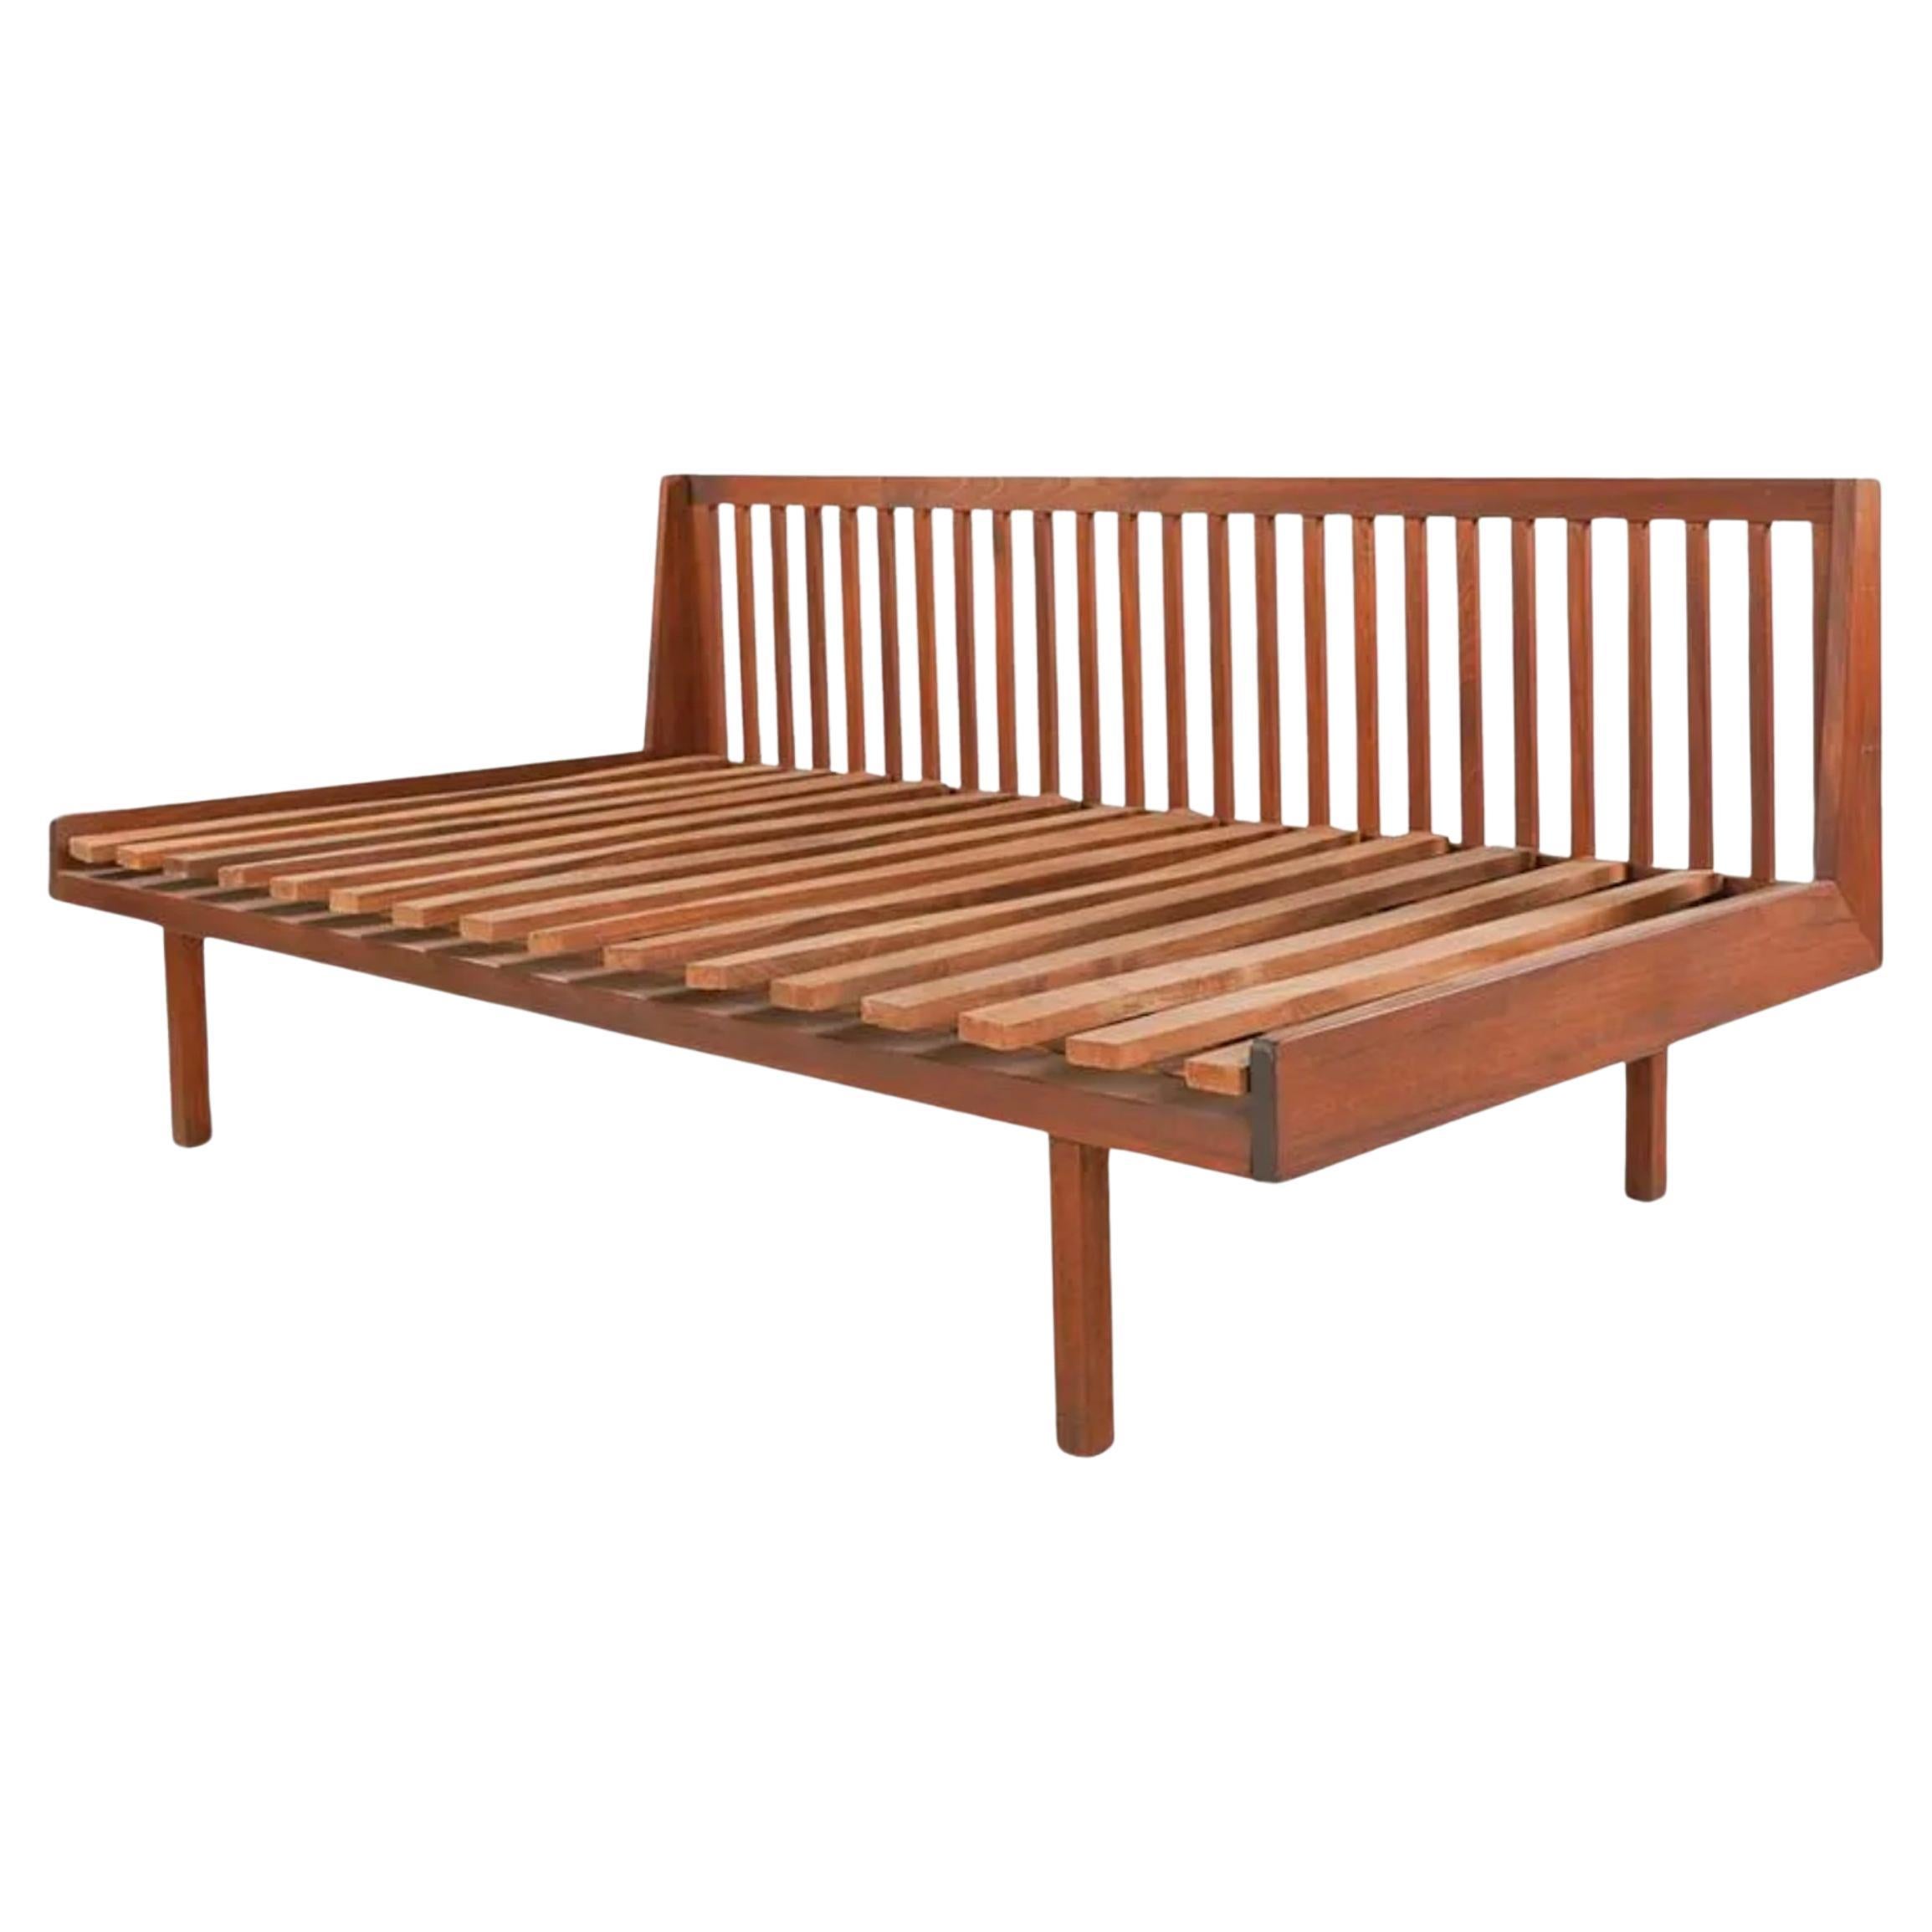 Superb Studio Craft Teak Mid-Century Sofa or Daybed or Twin Bed Frame